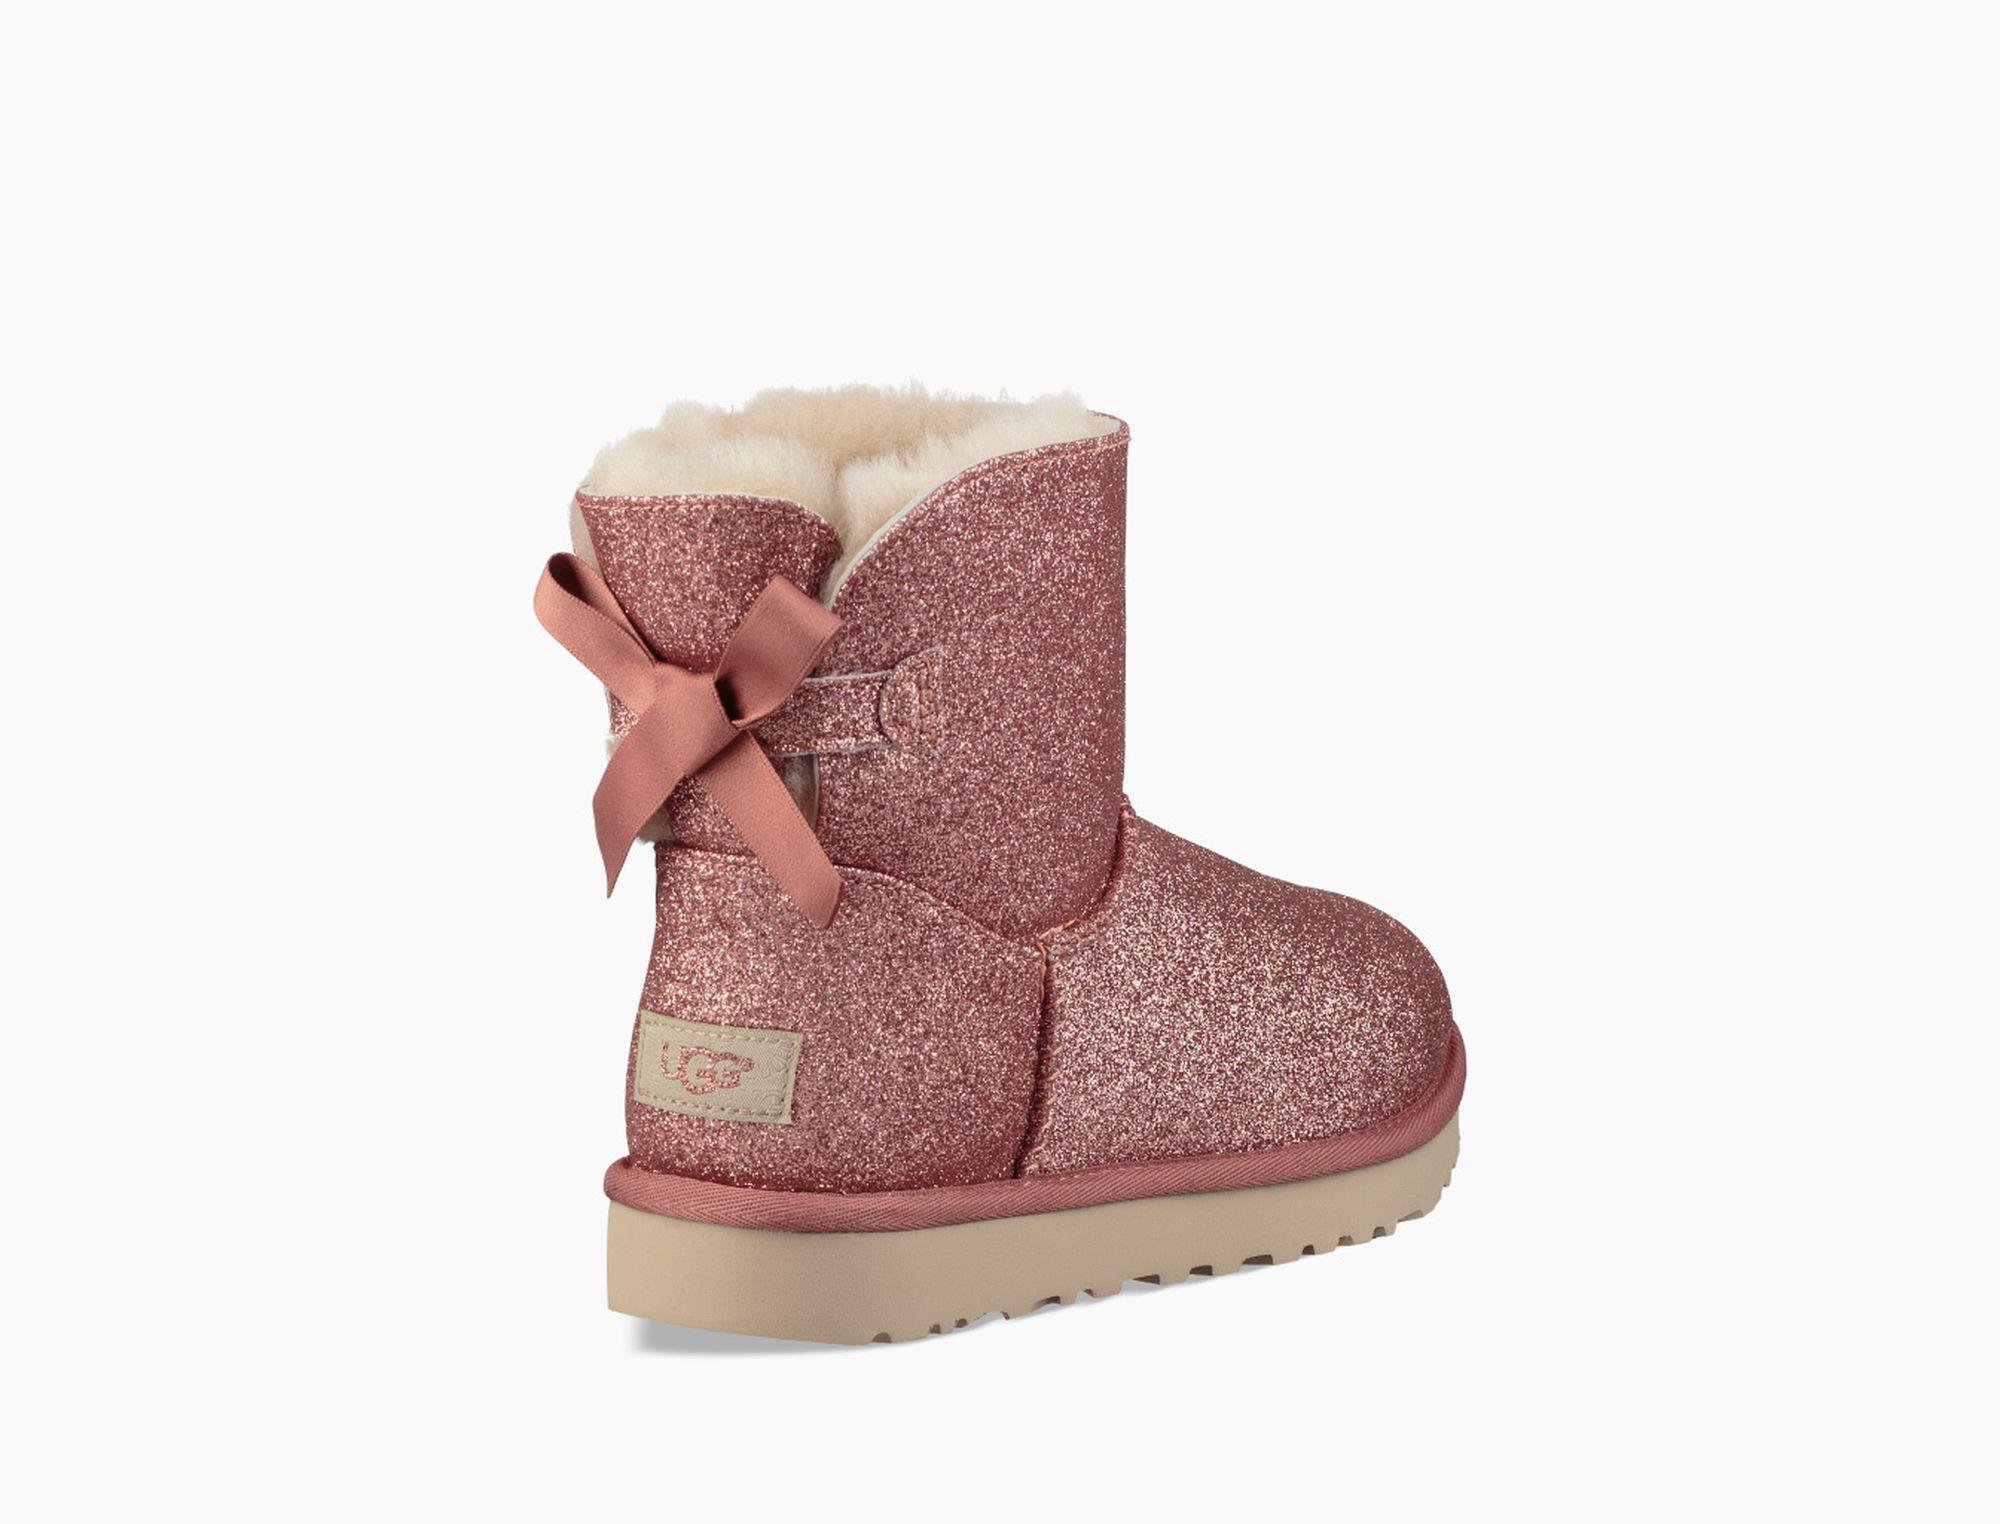 sparkly uggs with bows